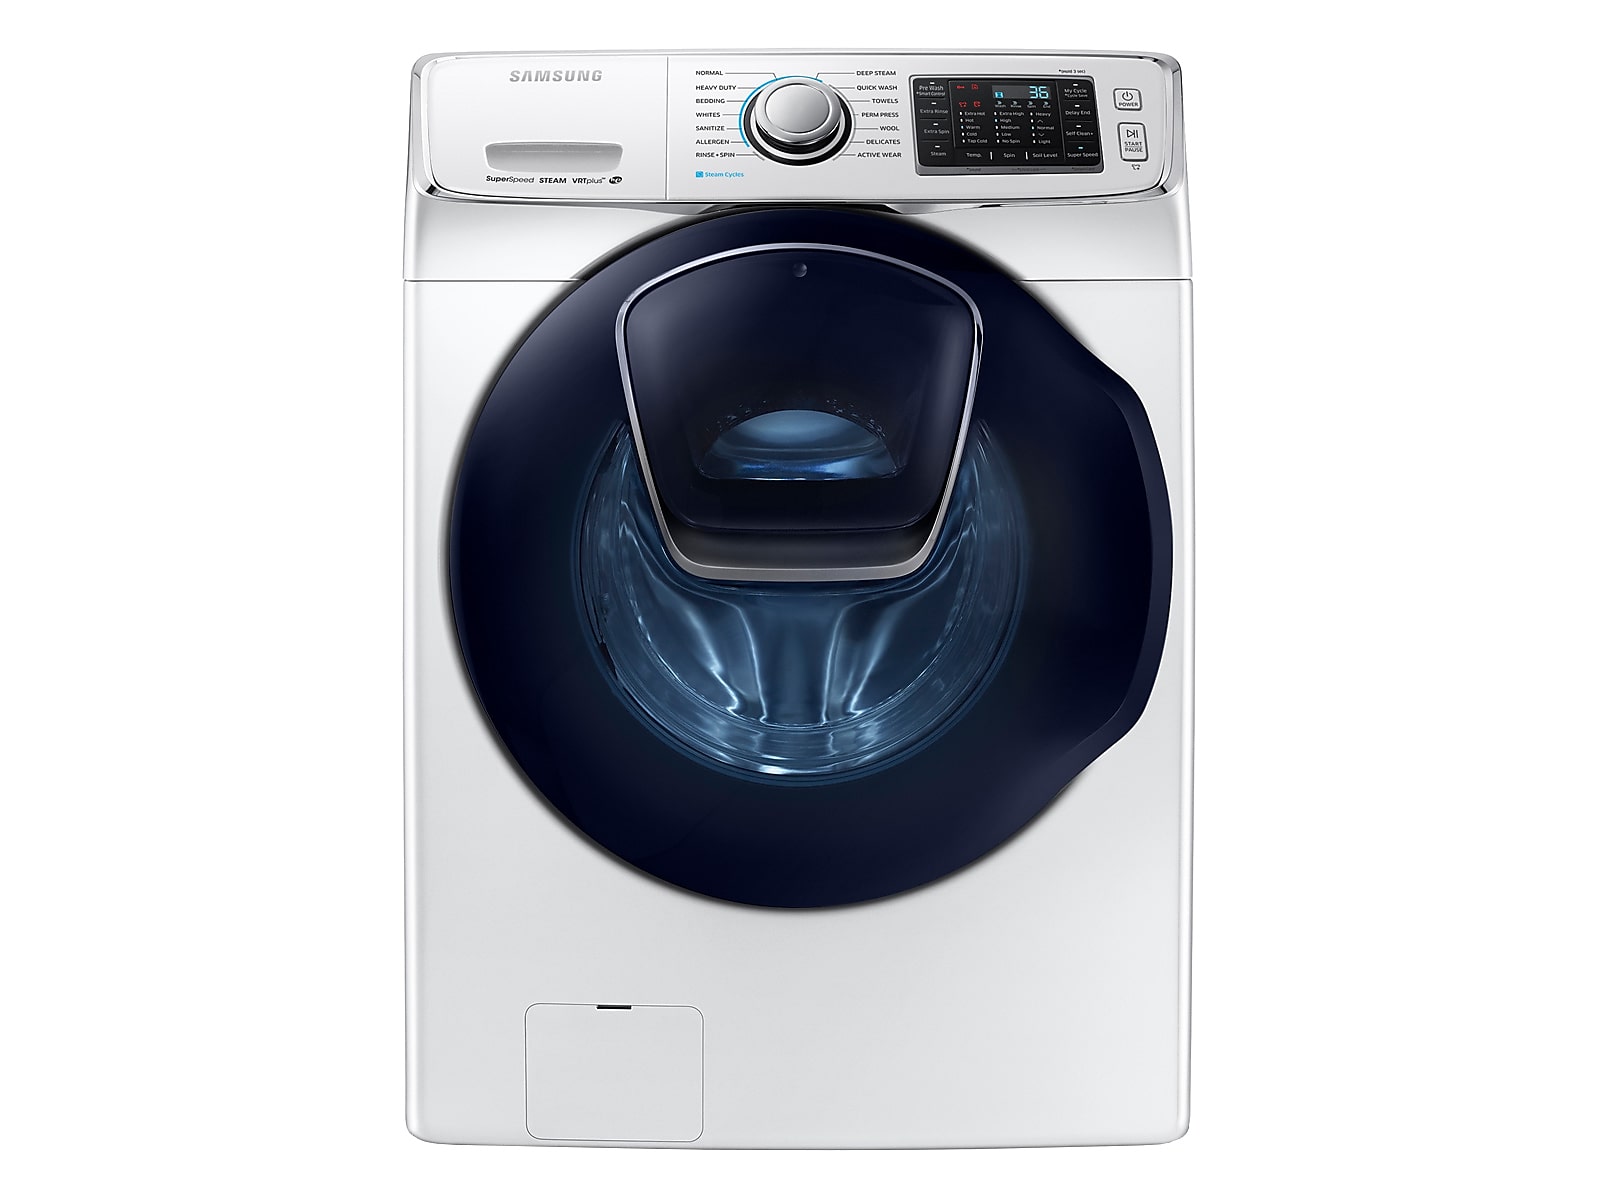 Samsung 4.5 cu. ft. AddWash™ Front Load Washer in White(WF45K6500AW/A2)